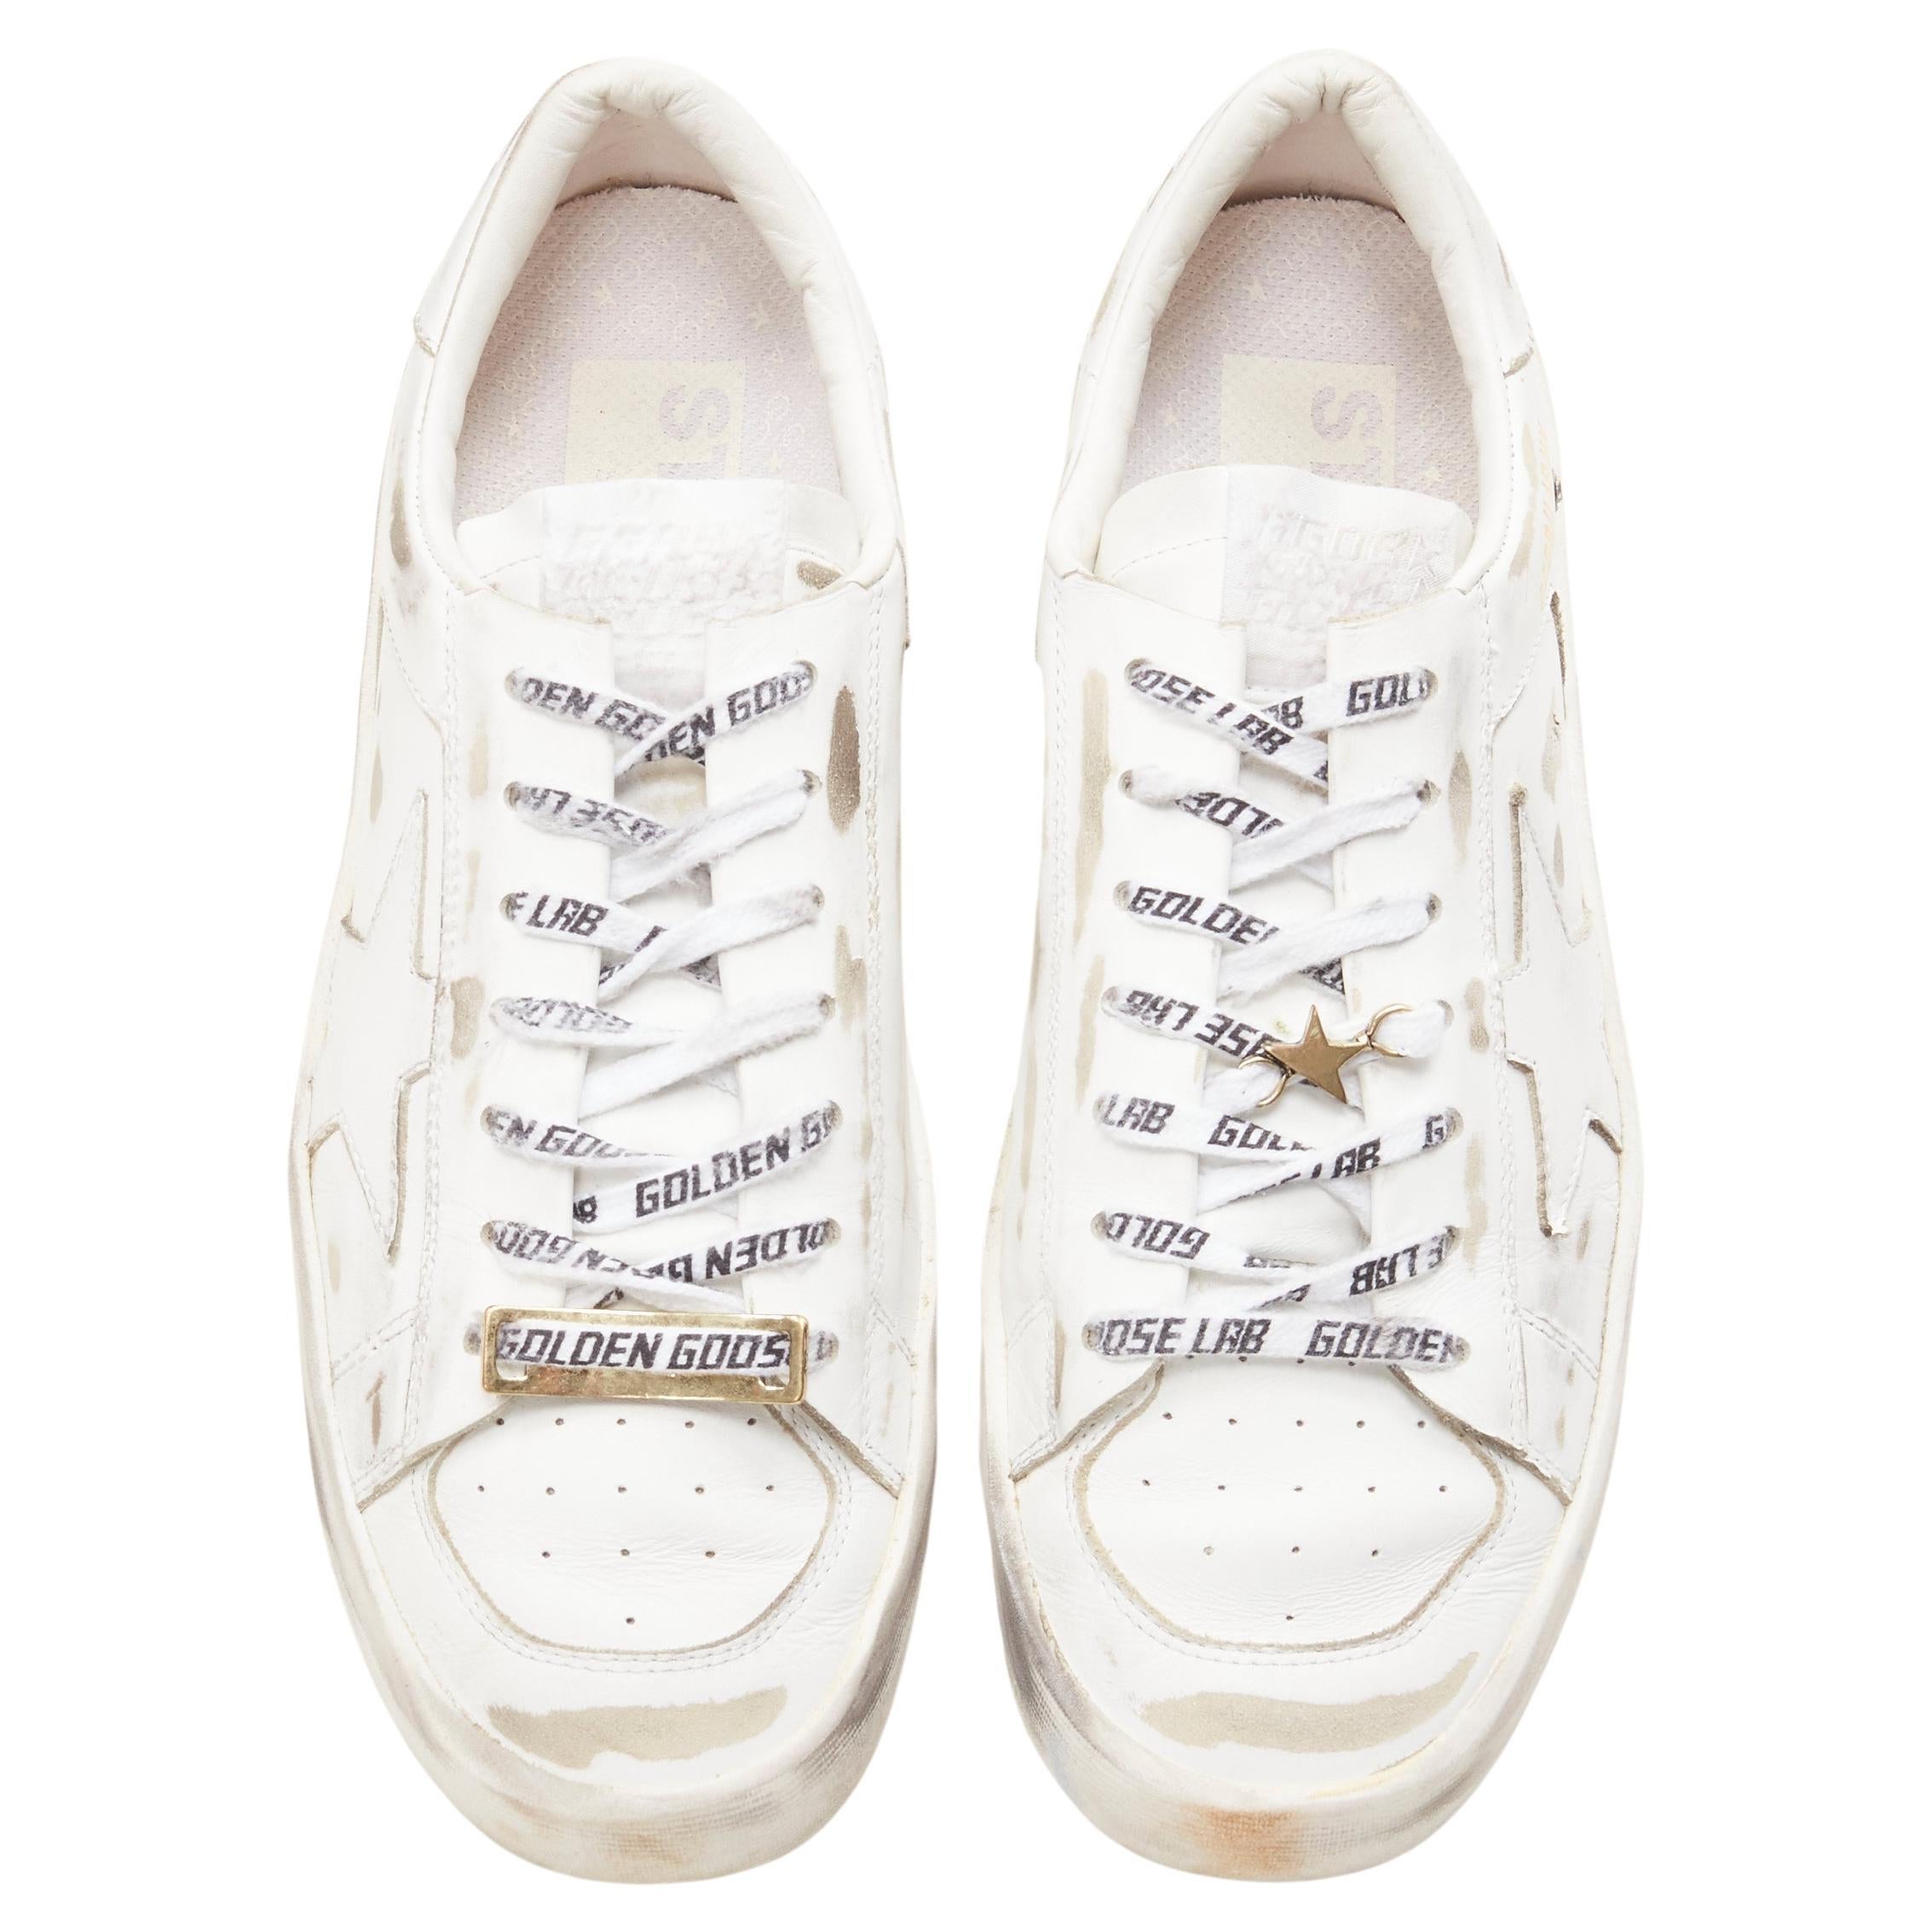 GOLDEN GOOSE GG/AFG Stardan distressed white low top sneaker EU38
Brand: Golden Goose
Model: GGDB/AFG

CONDITION:
Condition: Excellent, this item was pre-owned and is in excellent condition. 

SIZING:
Designer Size: EU 38

This Golden Goose item is